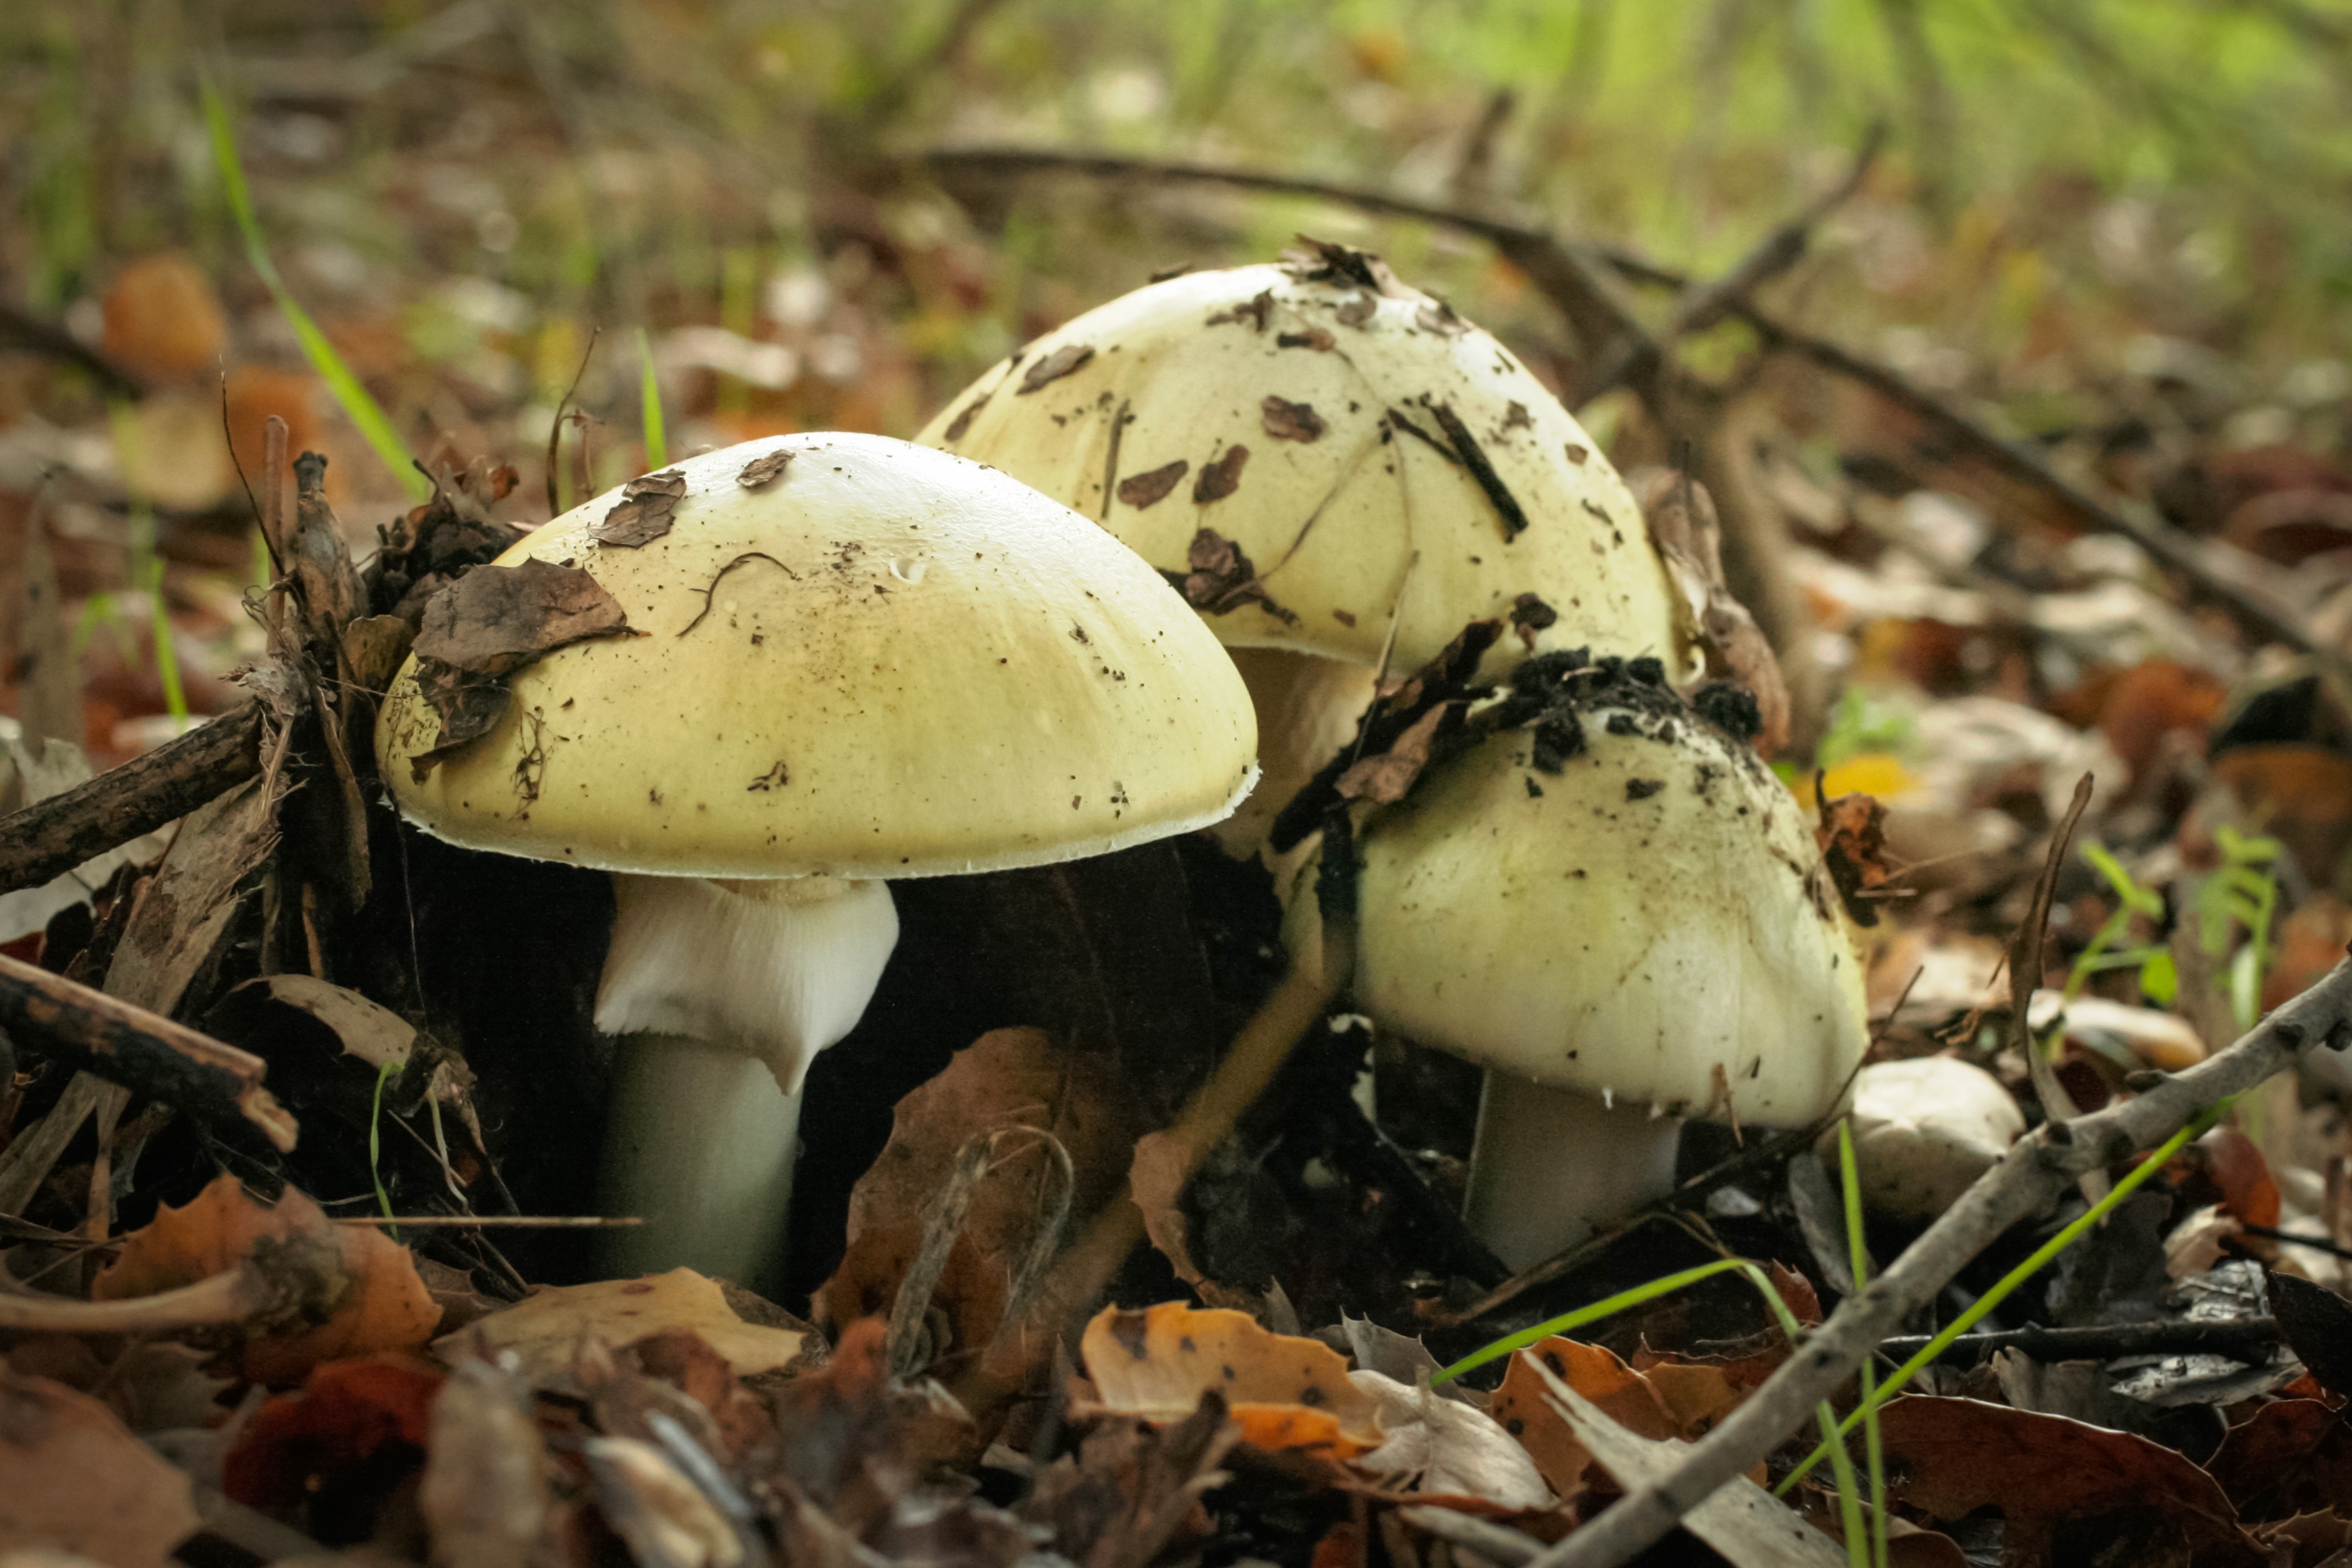 Use Caution When Collecting, Eating Wild Mushrooms